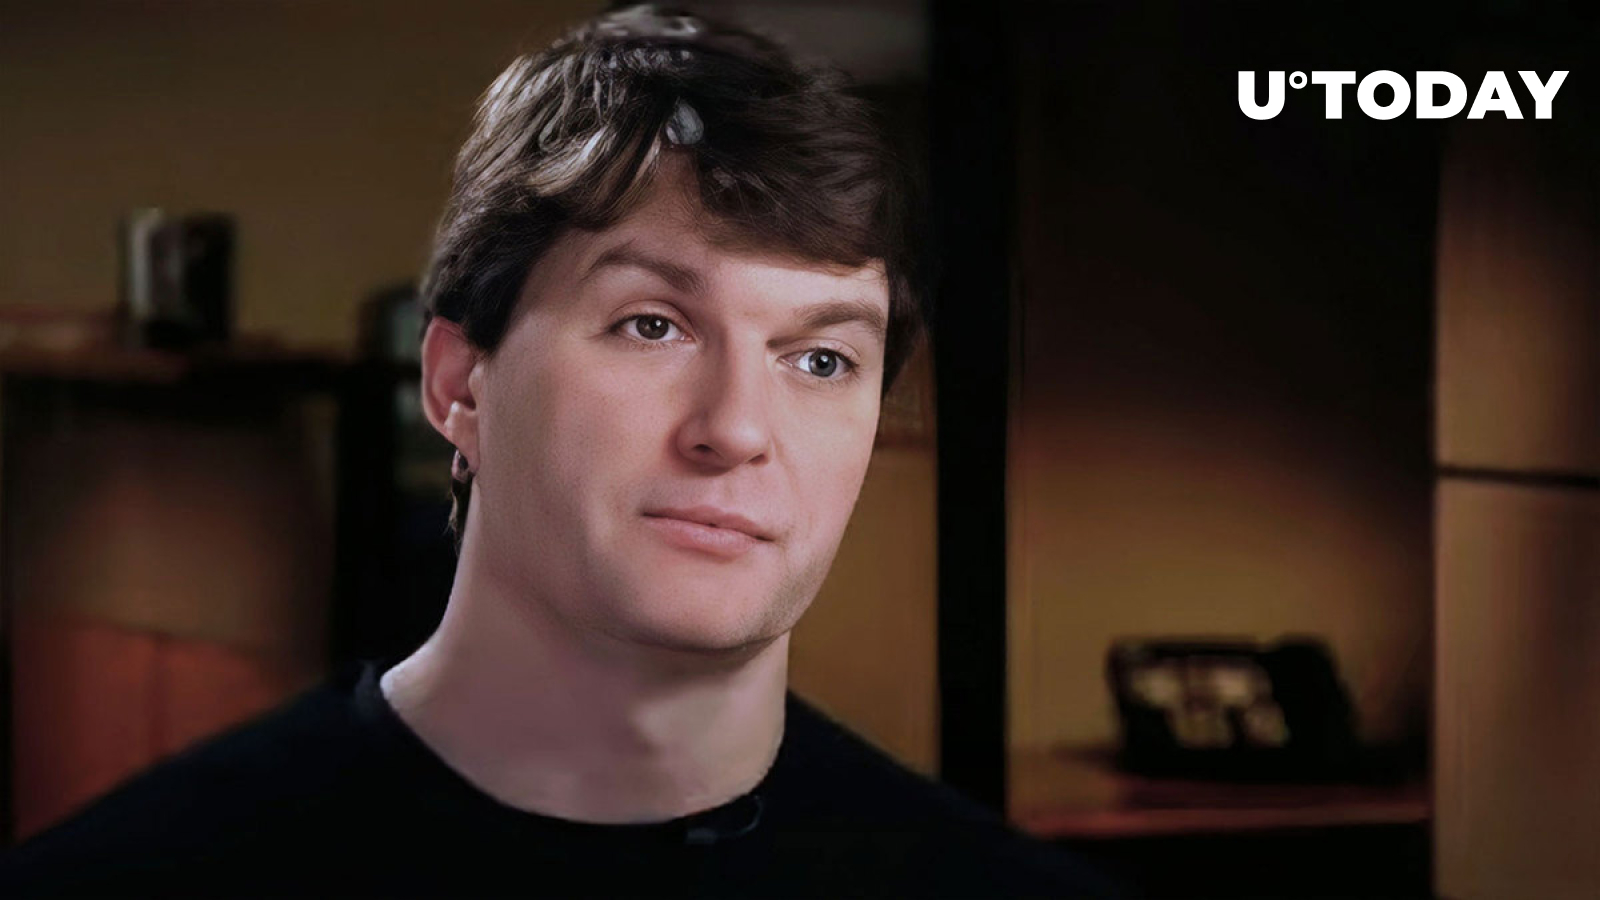 ‘Big Short’ Hero Michael Burry Back After Failed Bearish Call, Here’s His New Outlook